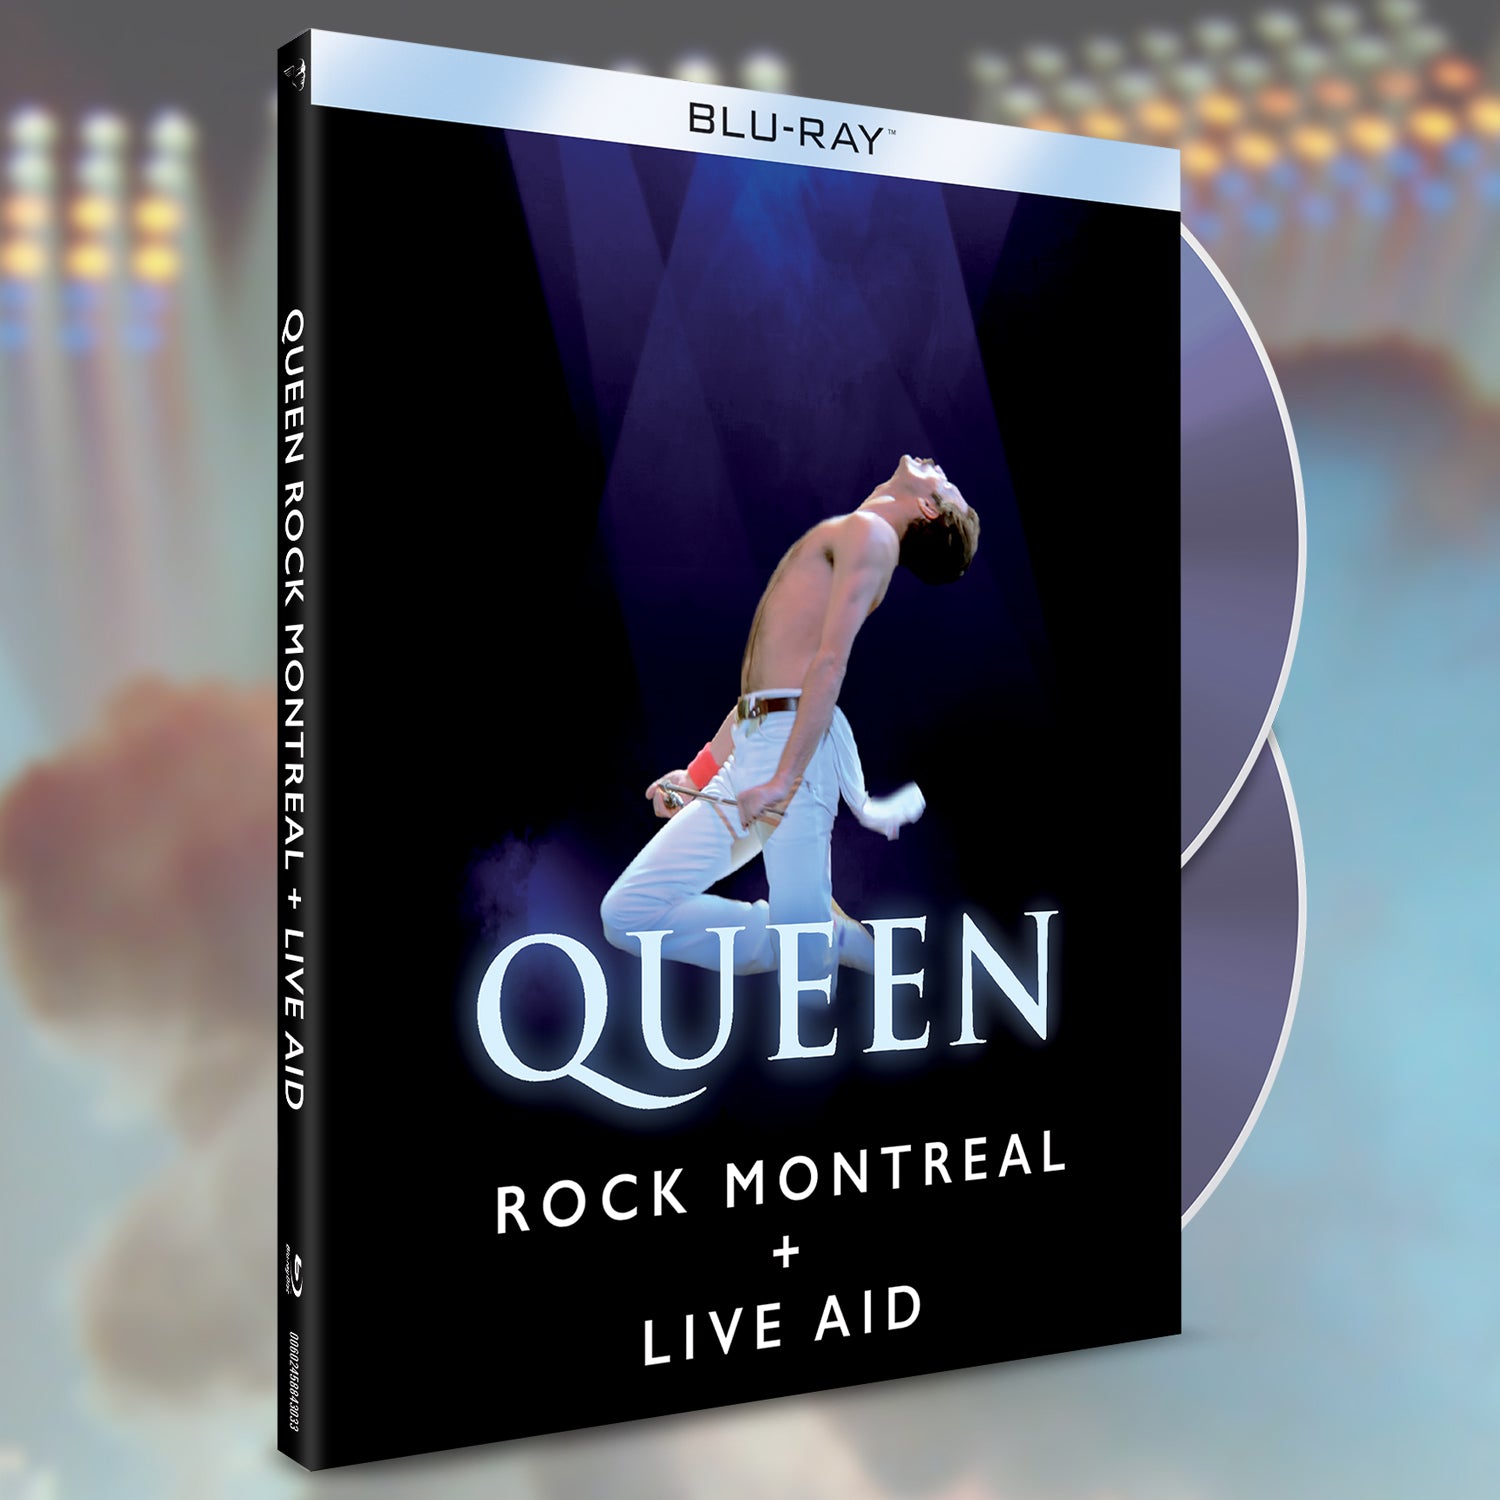 Queen - Rock Montreal + Live Aid Blu-ray